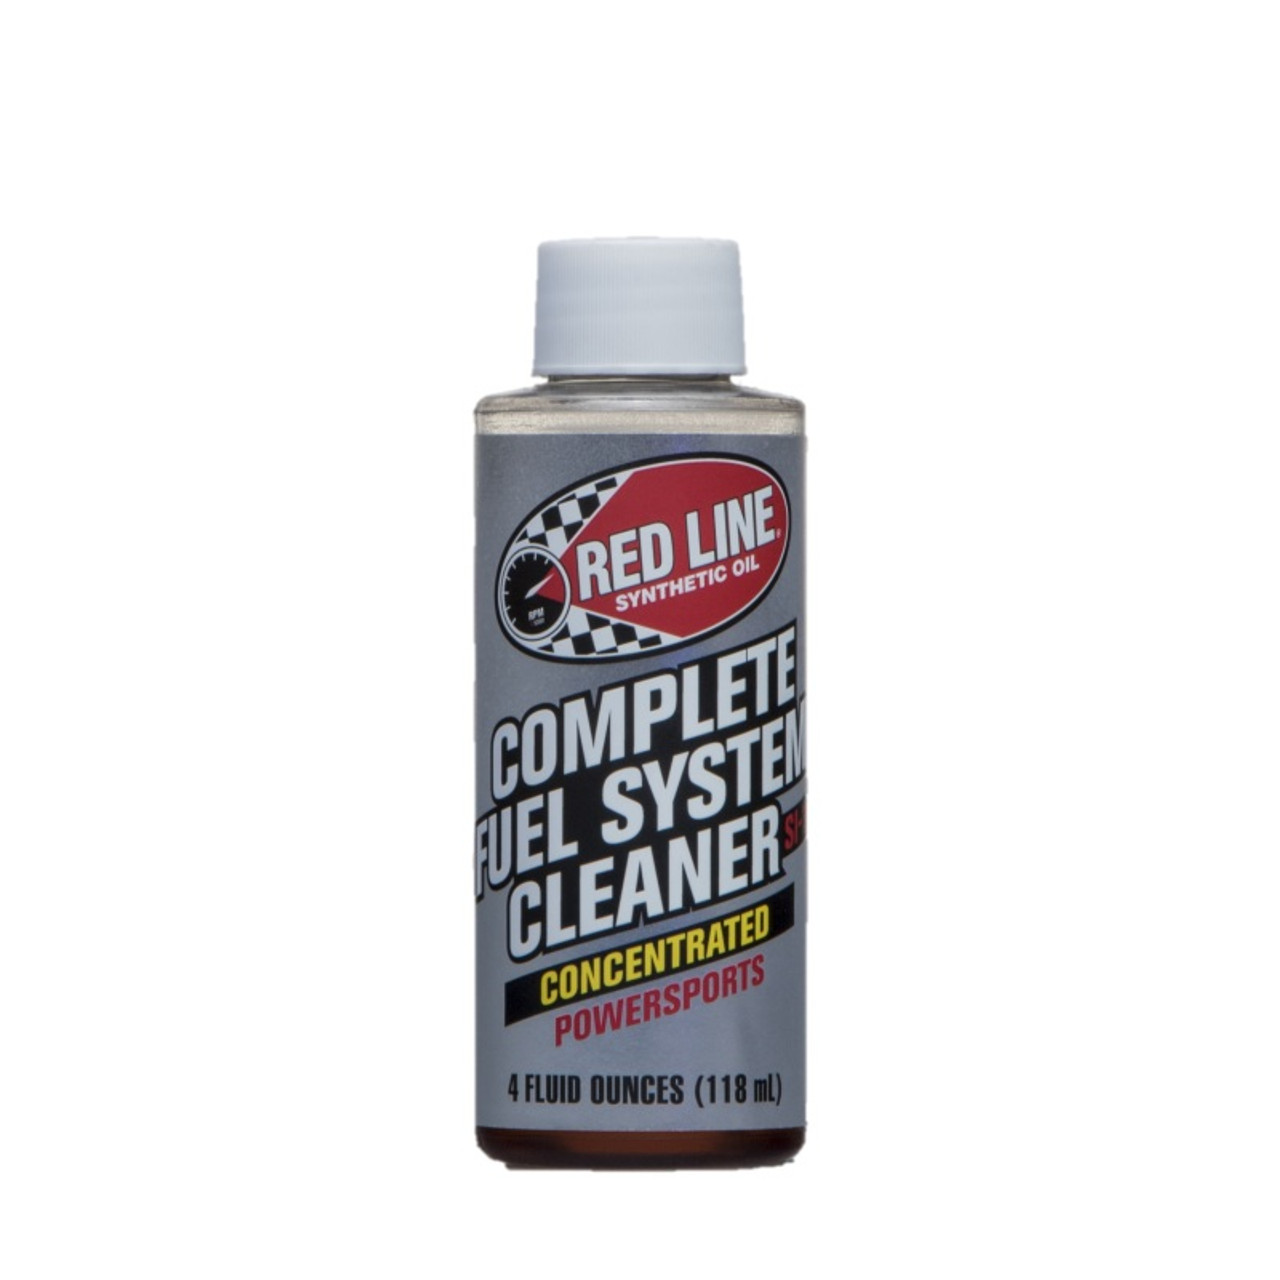 Red Line Complete Fuel System Cleaner for Motorcycles 4oz. - Single - 60102-1 User 1